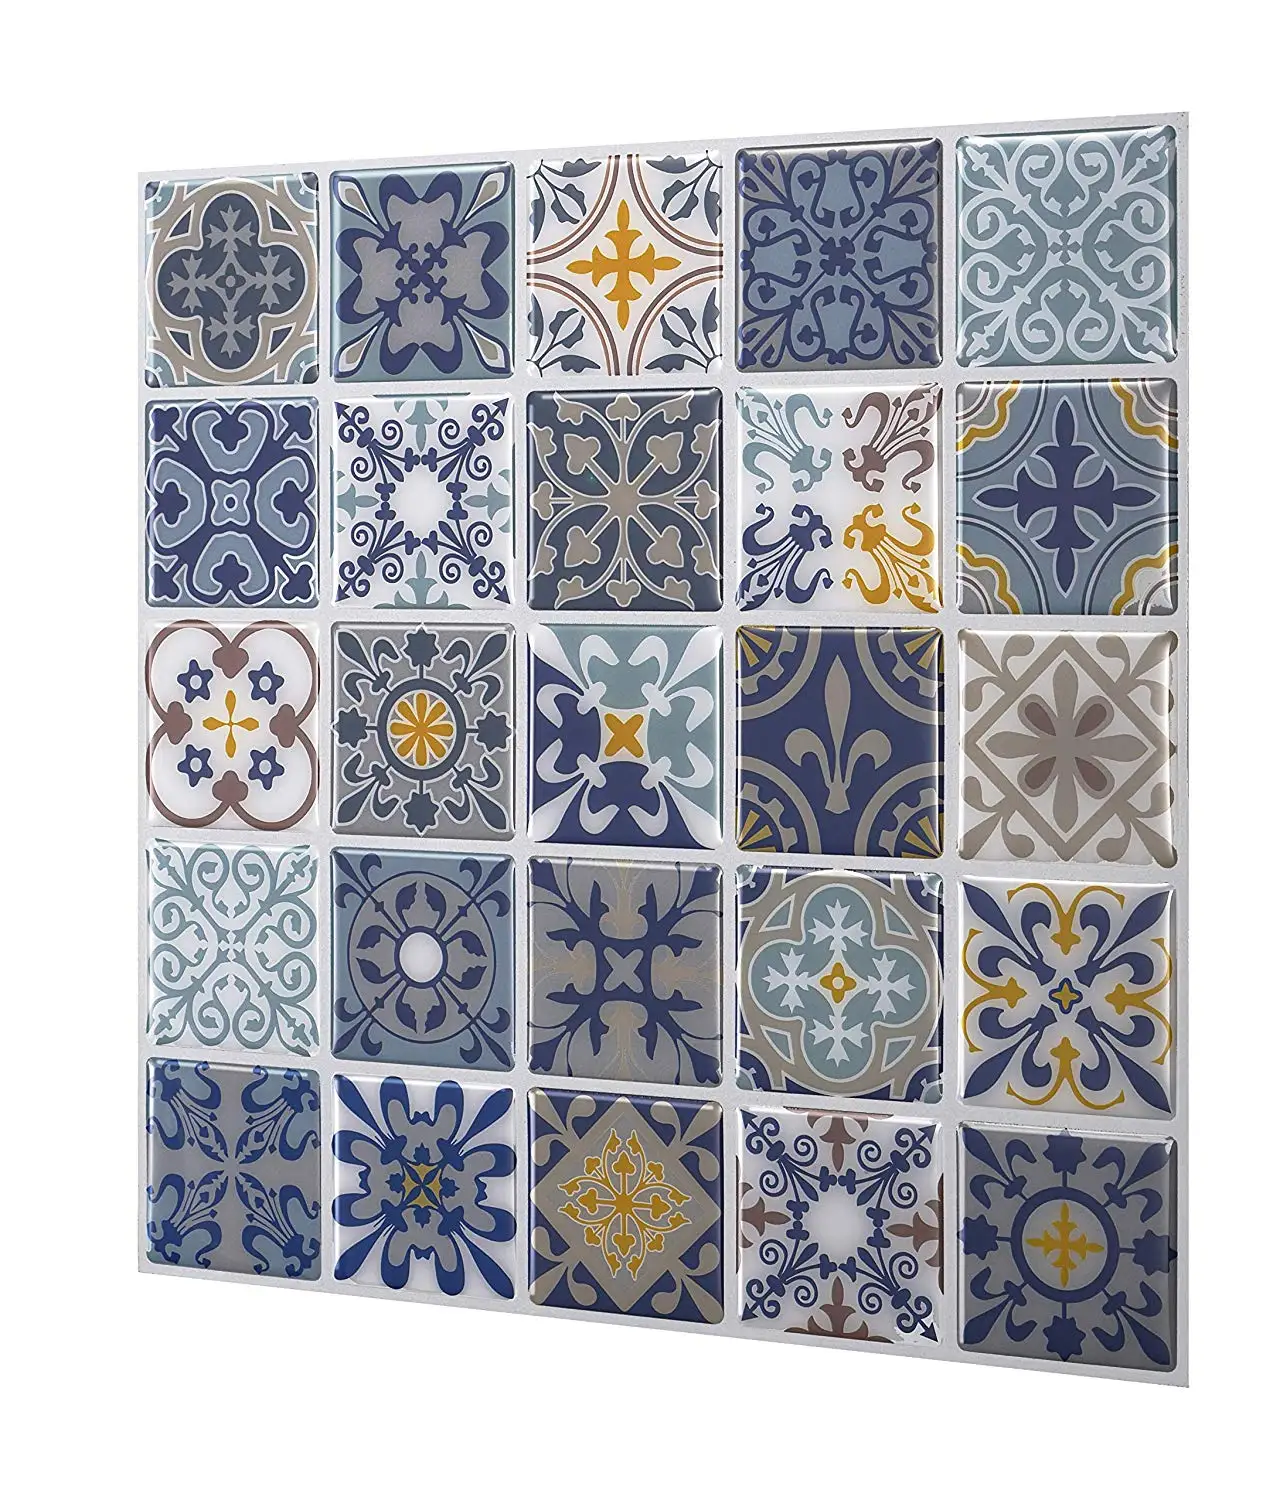 Moroccan pattern 3D wall paper easy DIY backsplash tile peel and stick for bedroom kitchen apartment